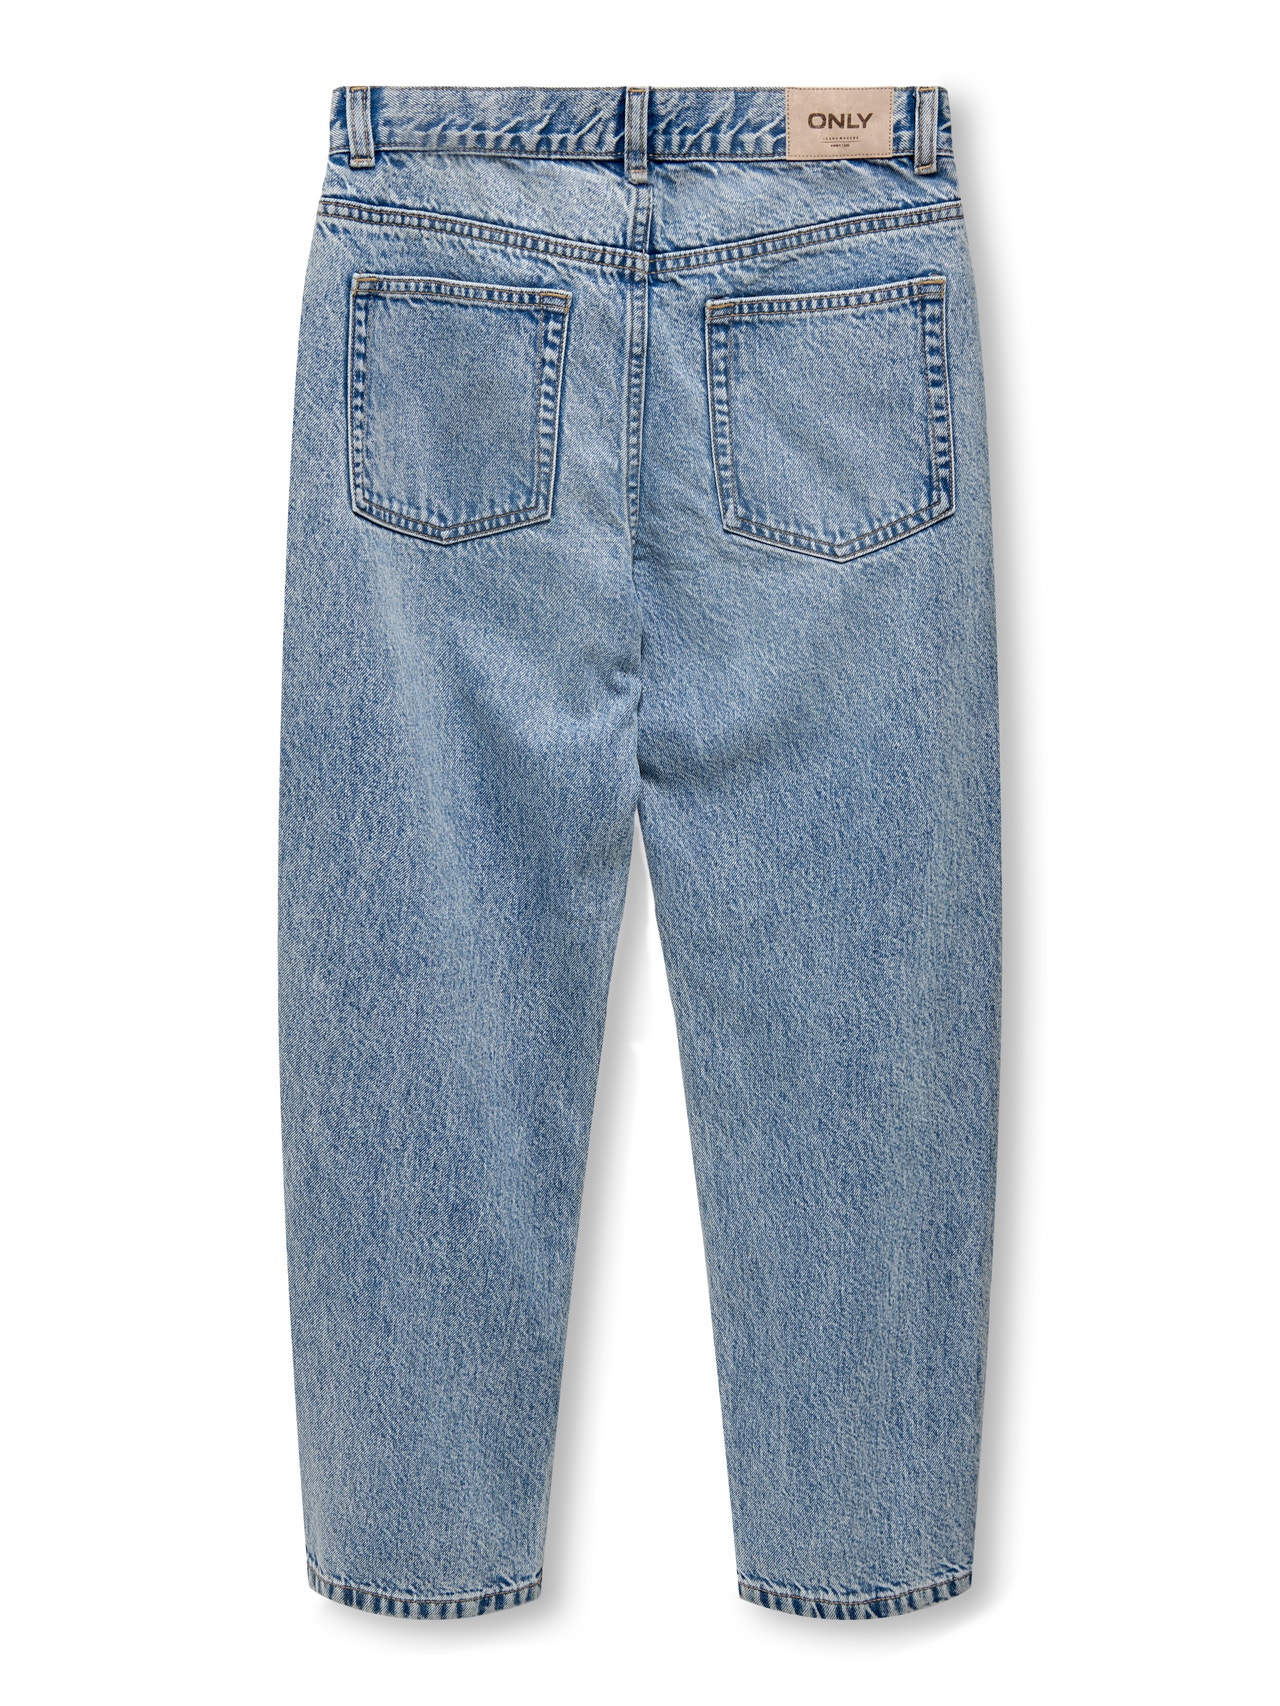 ONLY Jeans Relaxed Fit -Light Blue Denim - 15313795